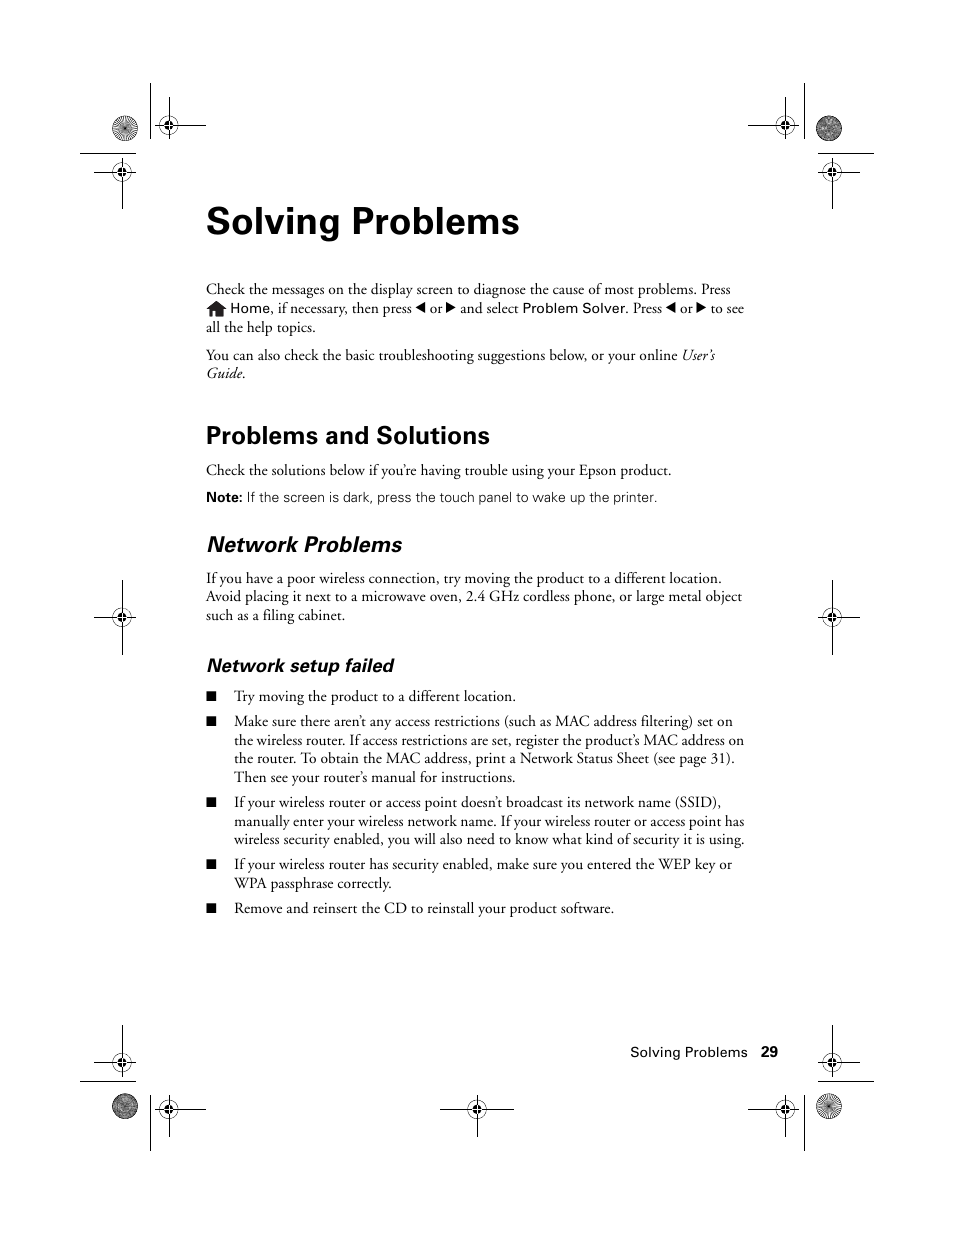 Solving problems, Problems and solutions, Network problems | Epson